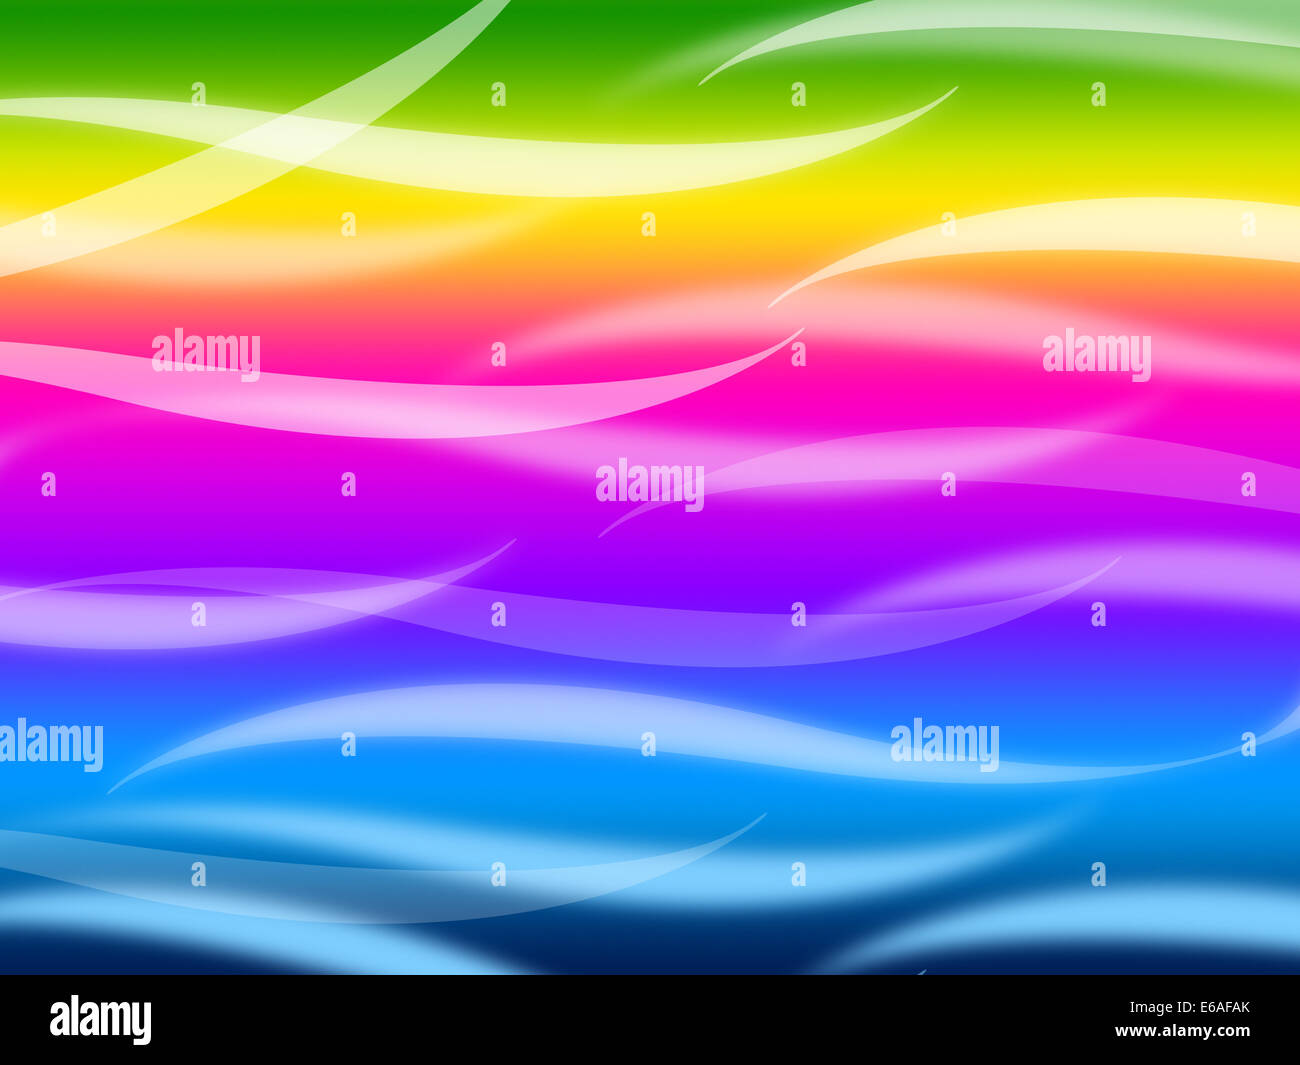 Colorful Waves Background Meaning Rainbow Wavy Lines Stock Photo